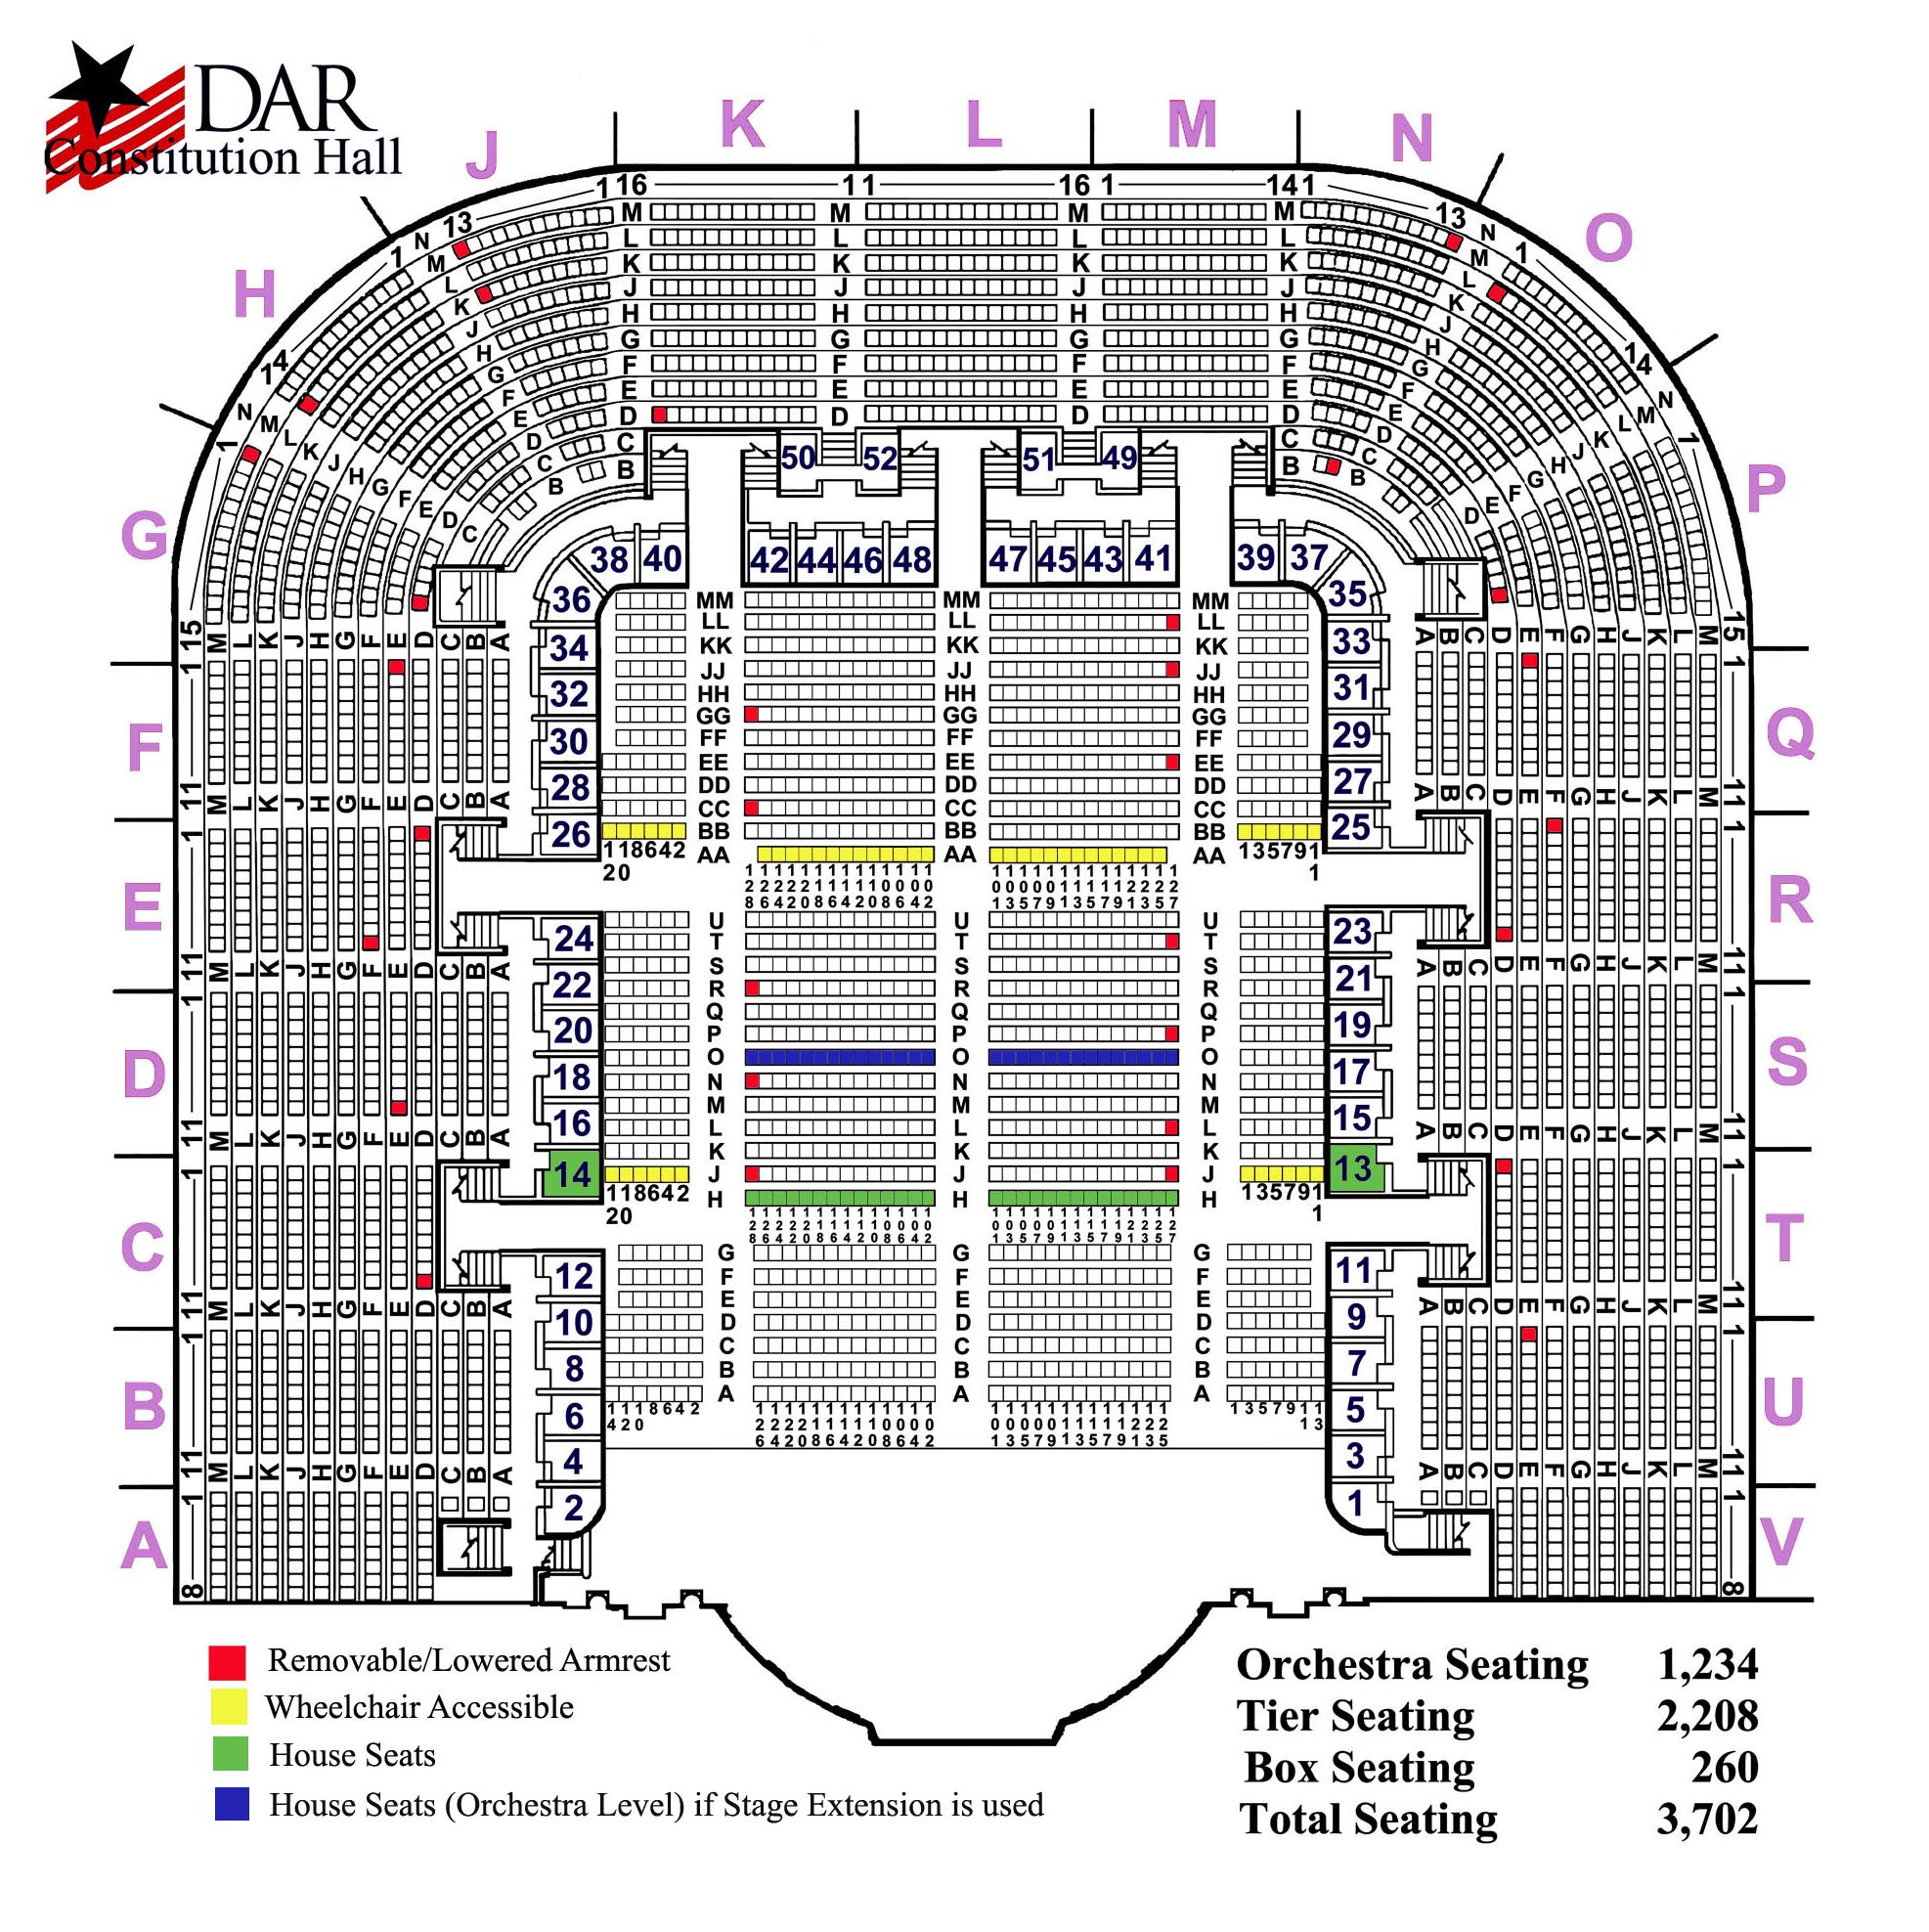 Seating Map | Daughters of the American Revolution